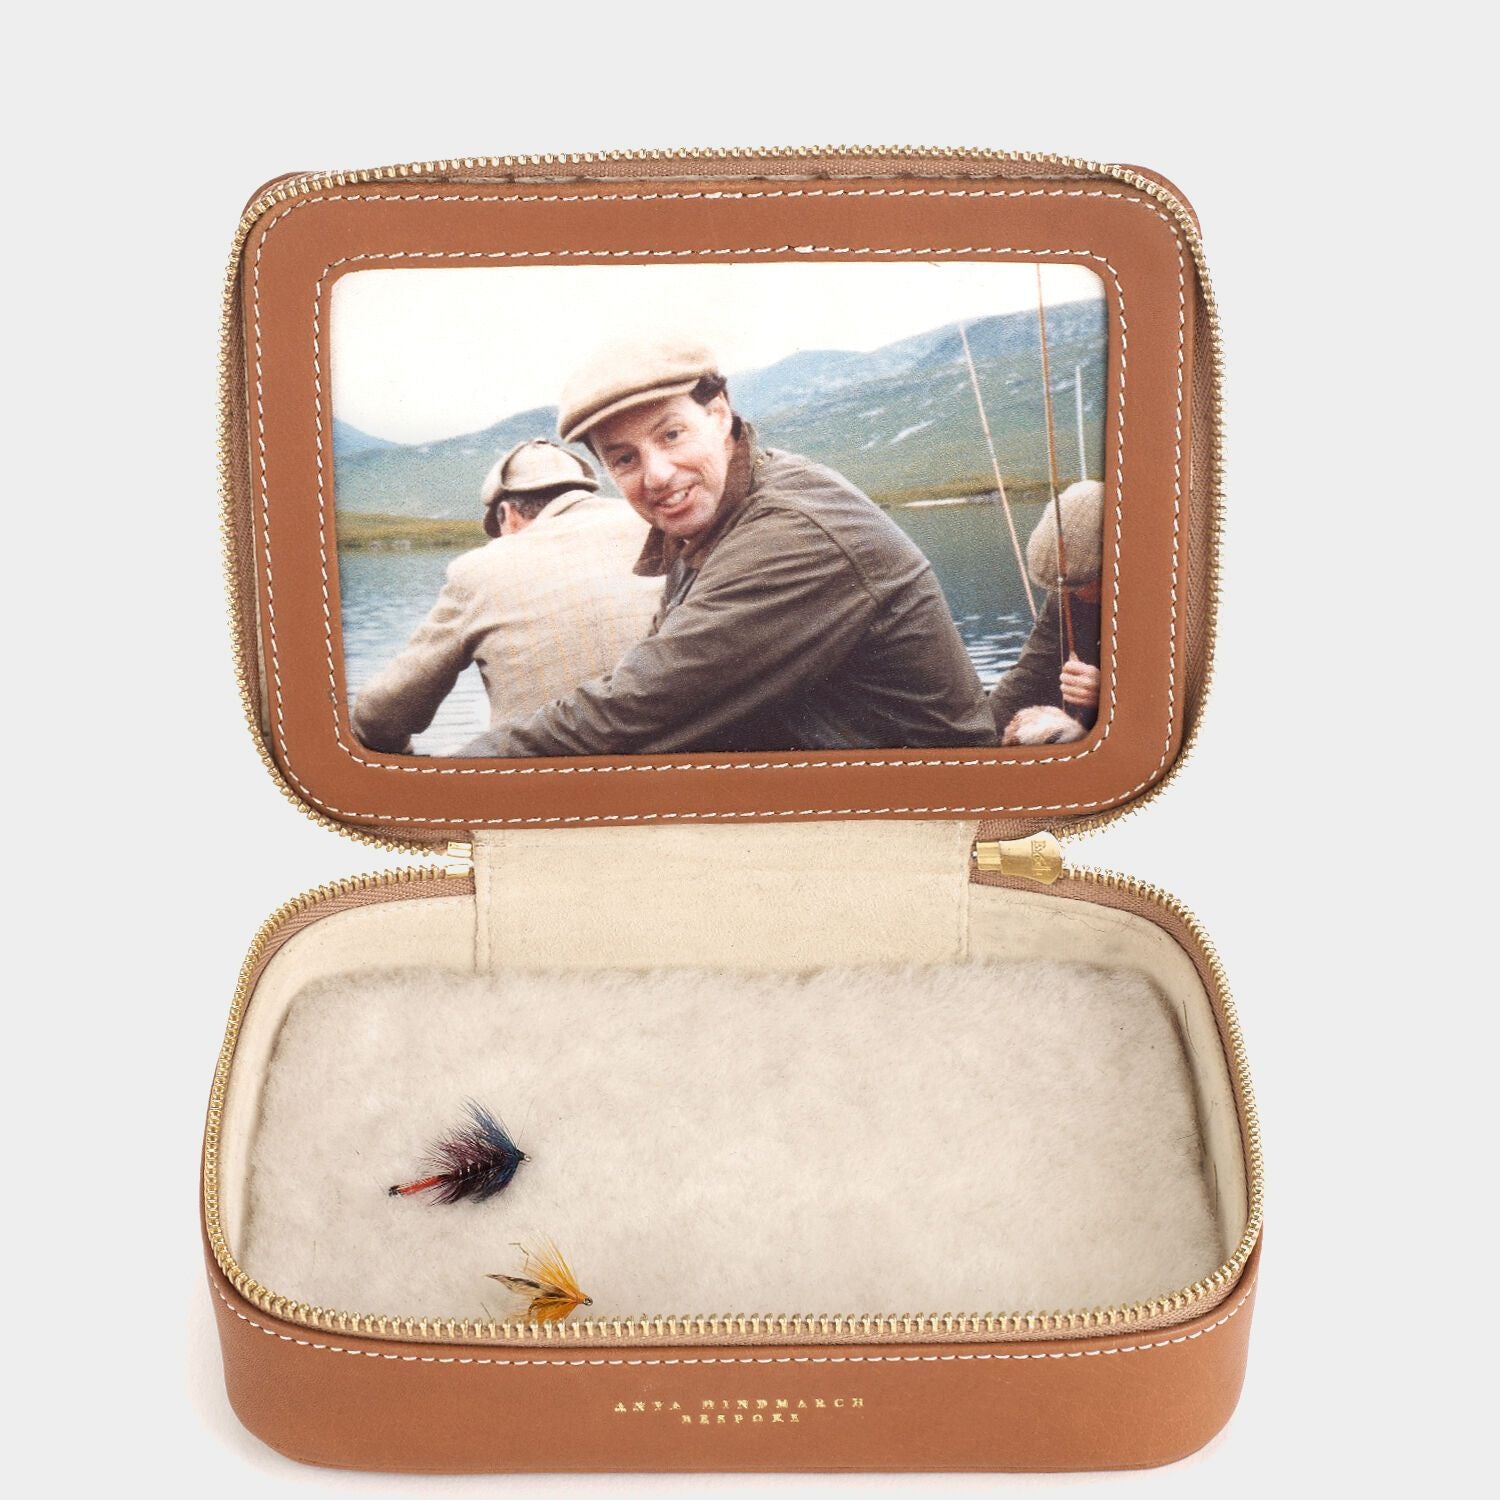 Bespoke Fishermans Fly Box -

                  
                    Butter Leather in Tan -
                  

                  Anya Hindmarch EU
